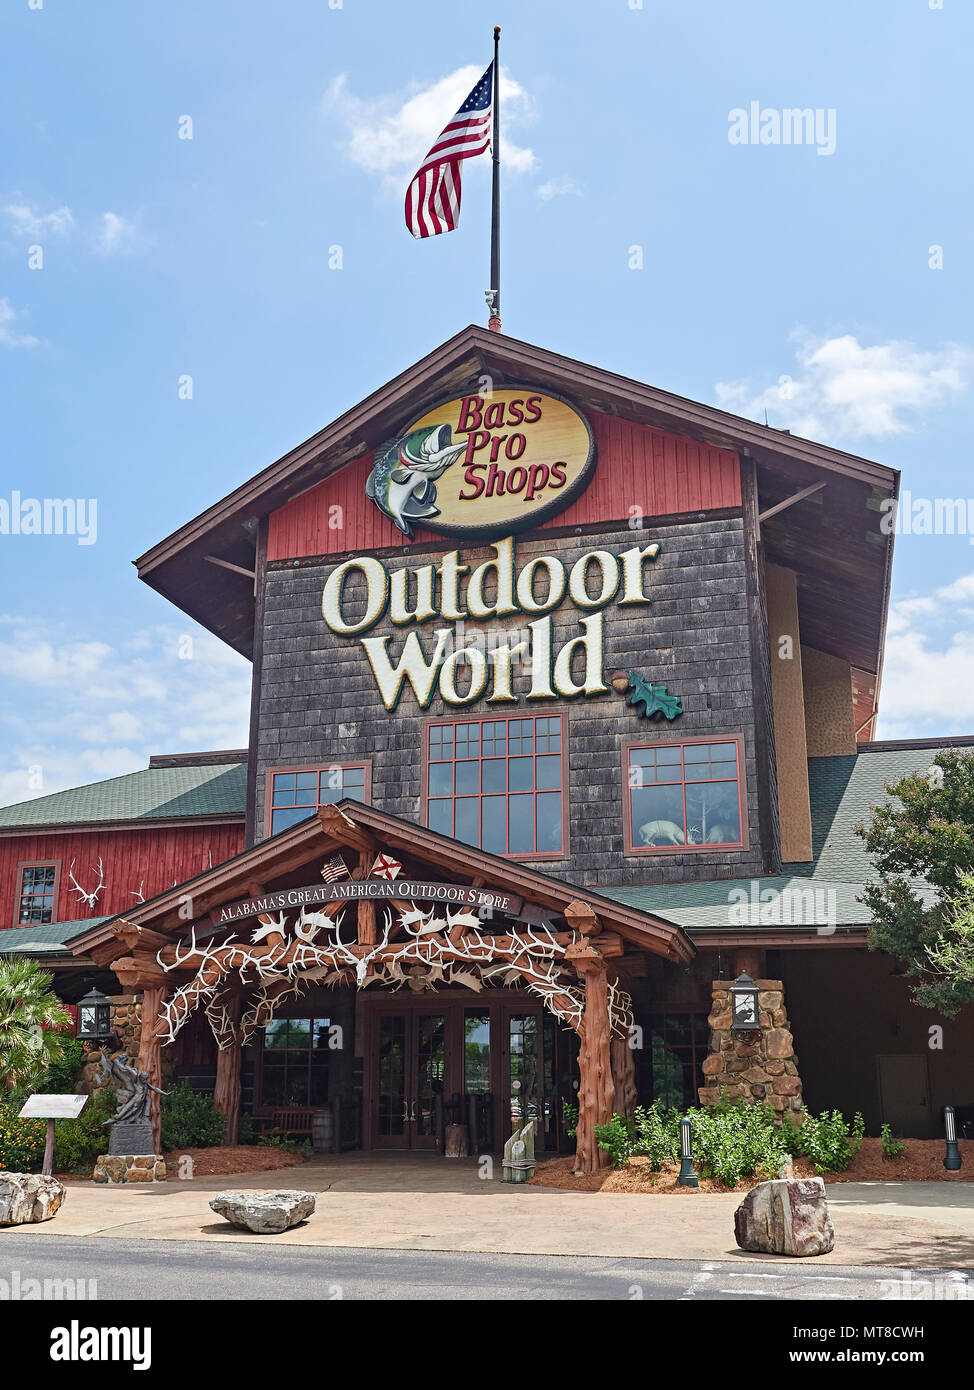 https://c8.alamy.com/comp/MT8CWH/bass-pro-shops-outdoor-world-front-exterior-entrance-of-the-mega-sized-camping-hunting-fishing-and-boating-store-or-business-in-prattville-alabama-MT8CWH.jpg